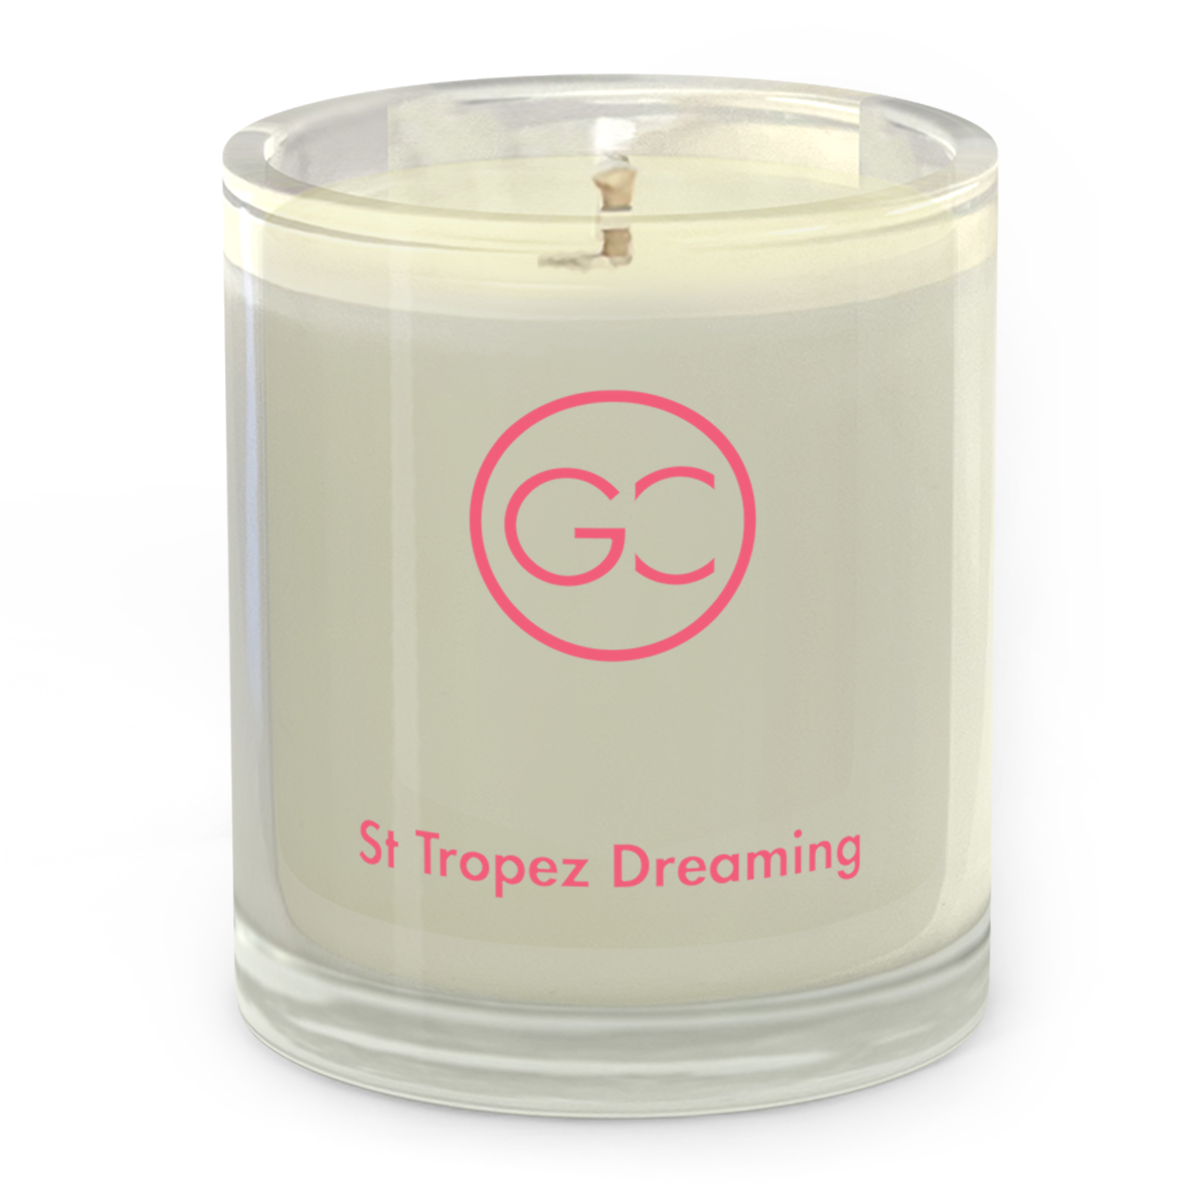 St Tropez Dreaming - French Pear Scented Soy Candle 55hr Burn